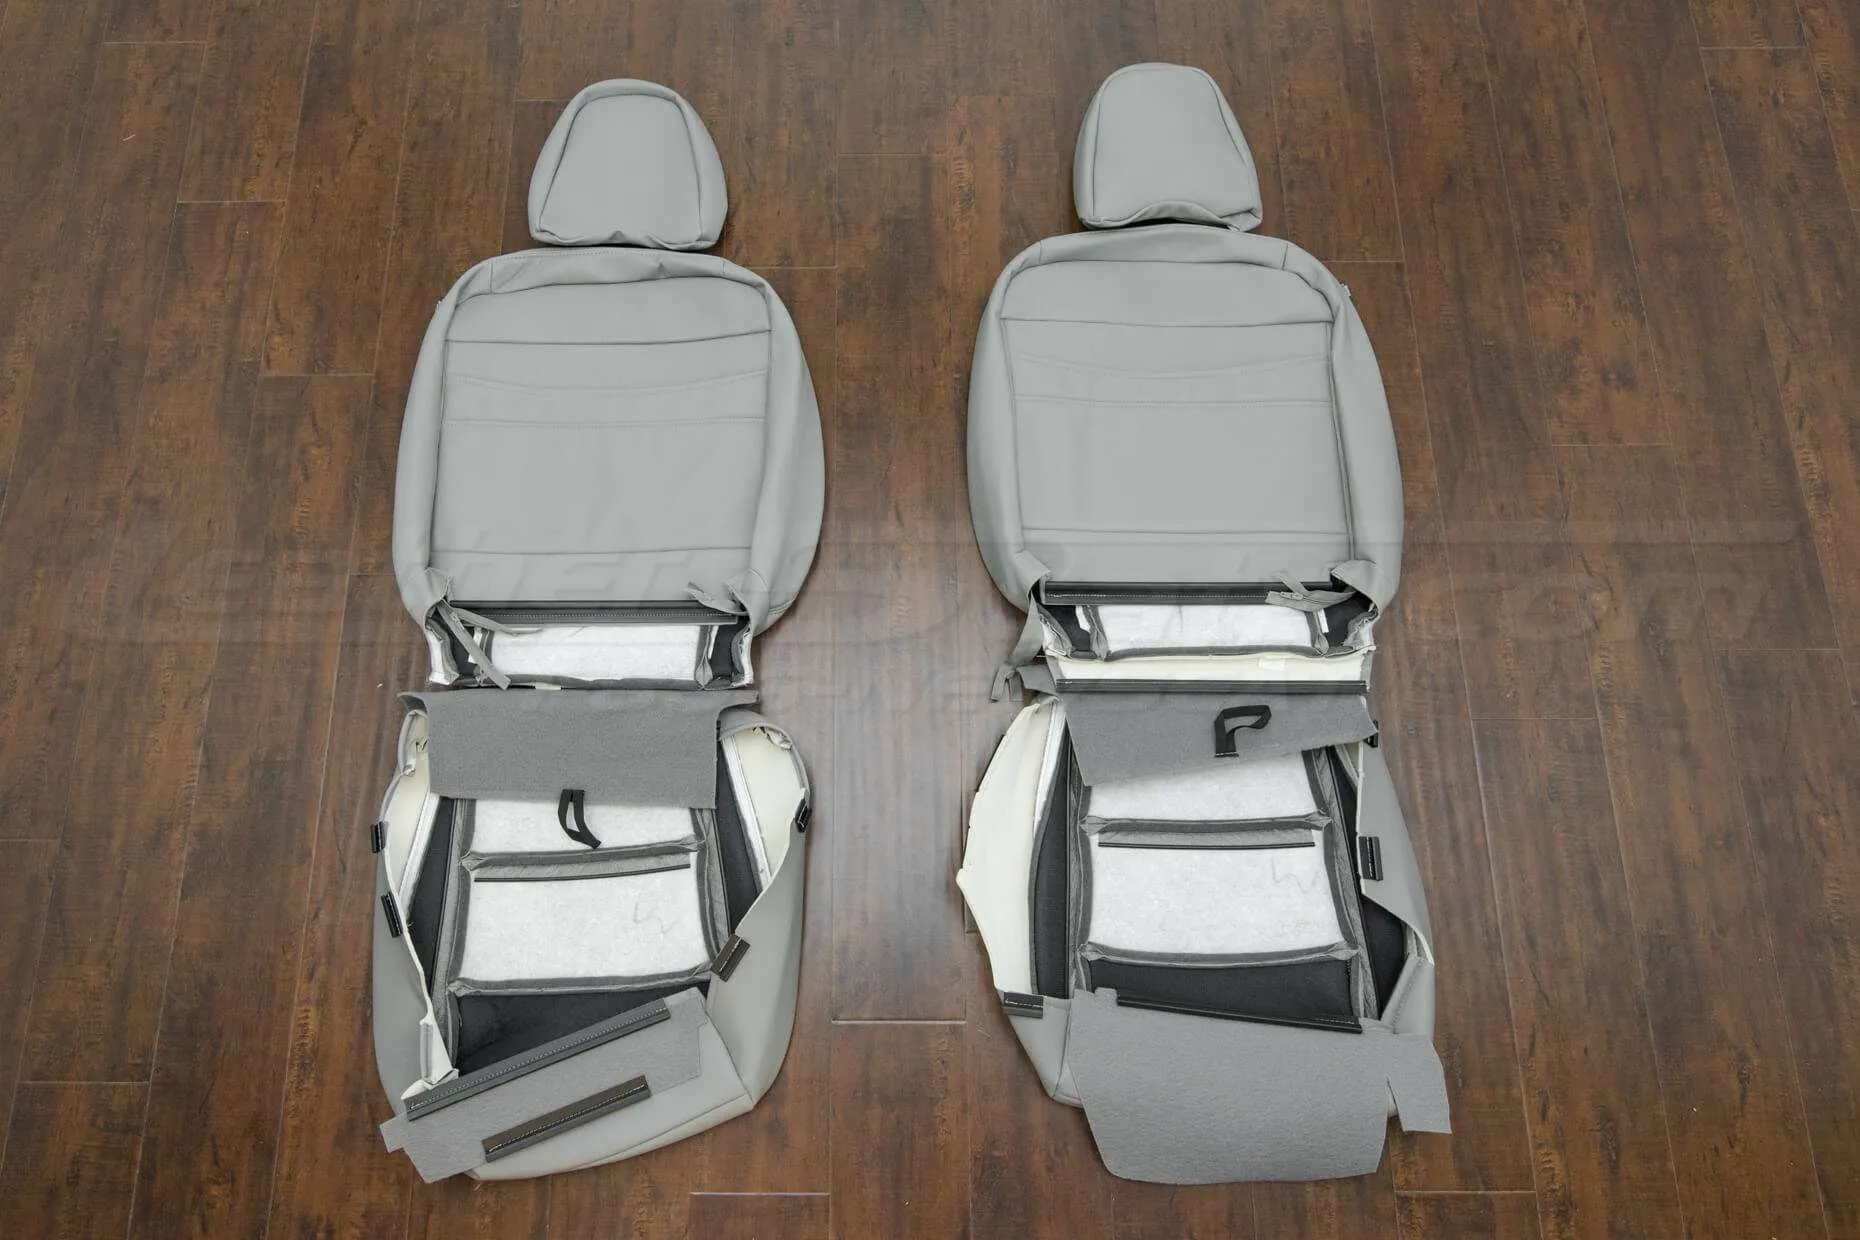 2011-2013 Subaru Forester Leather Seats - Ash - Back view of front seats